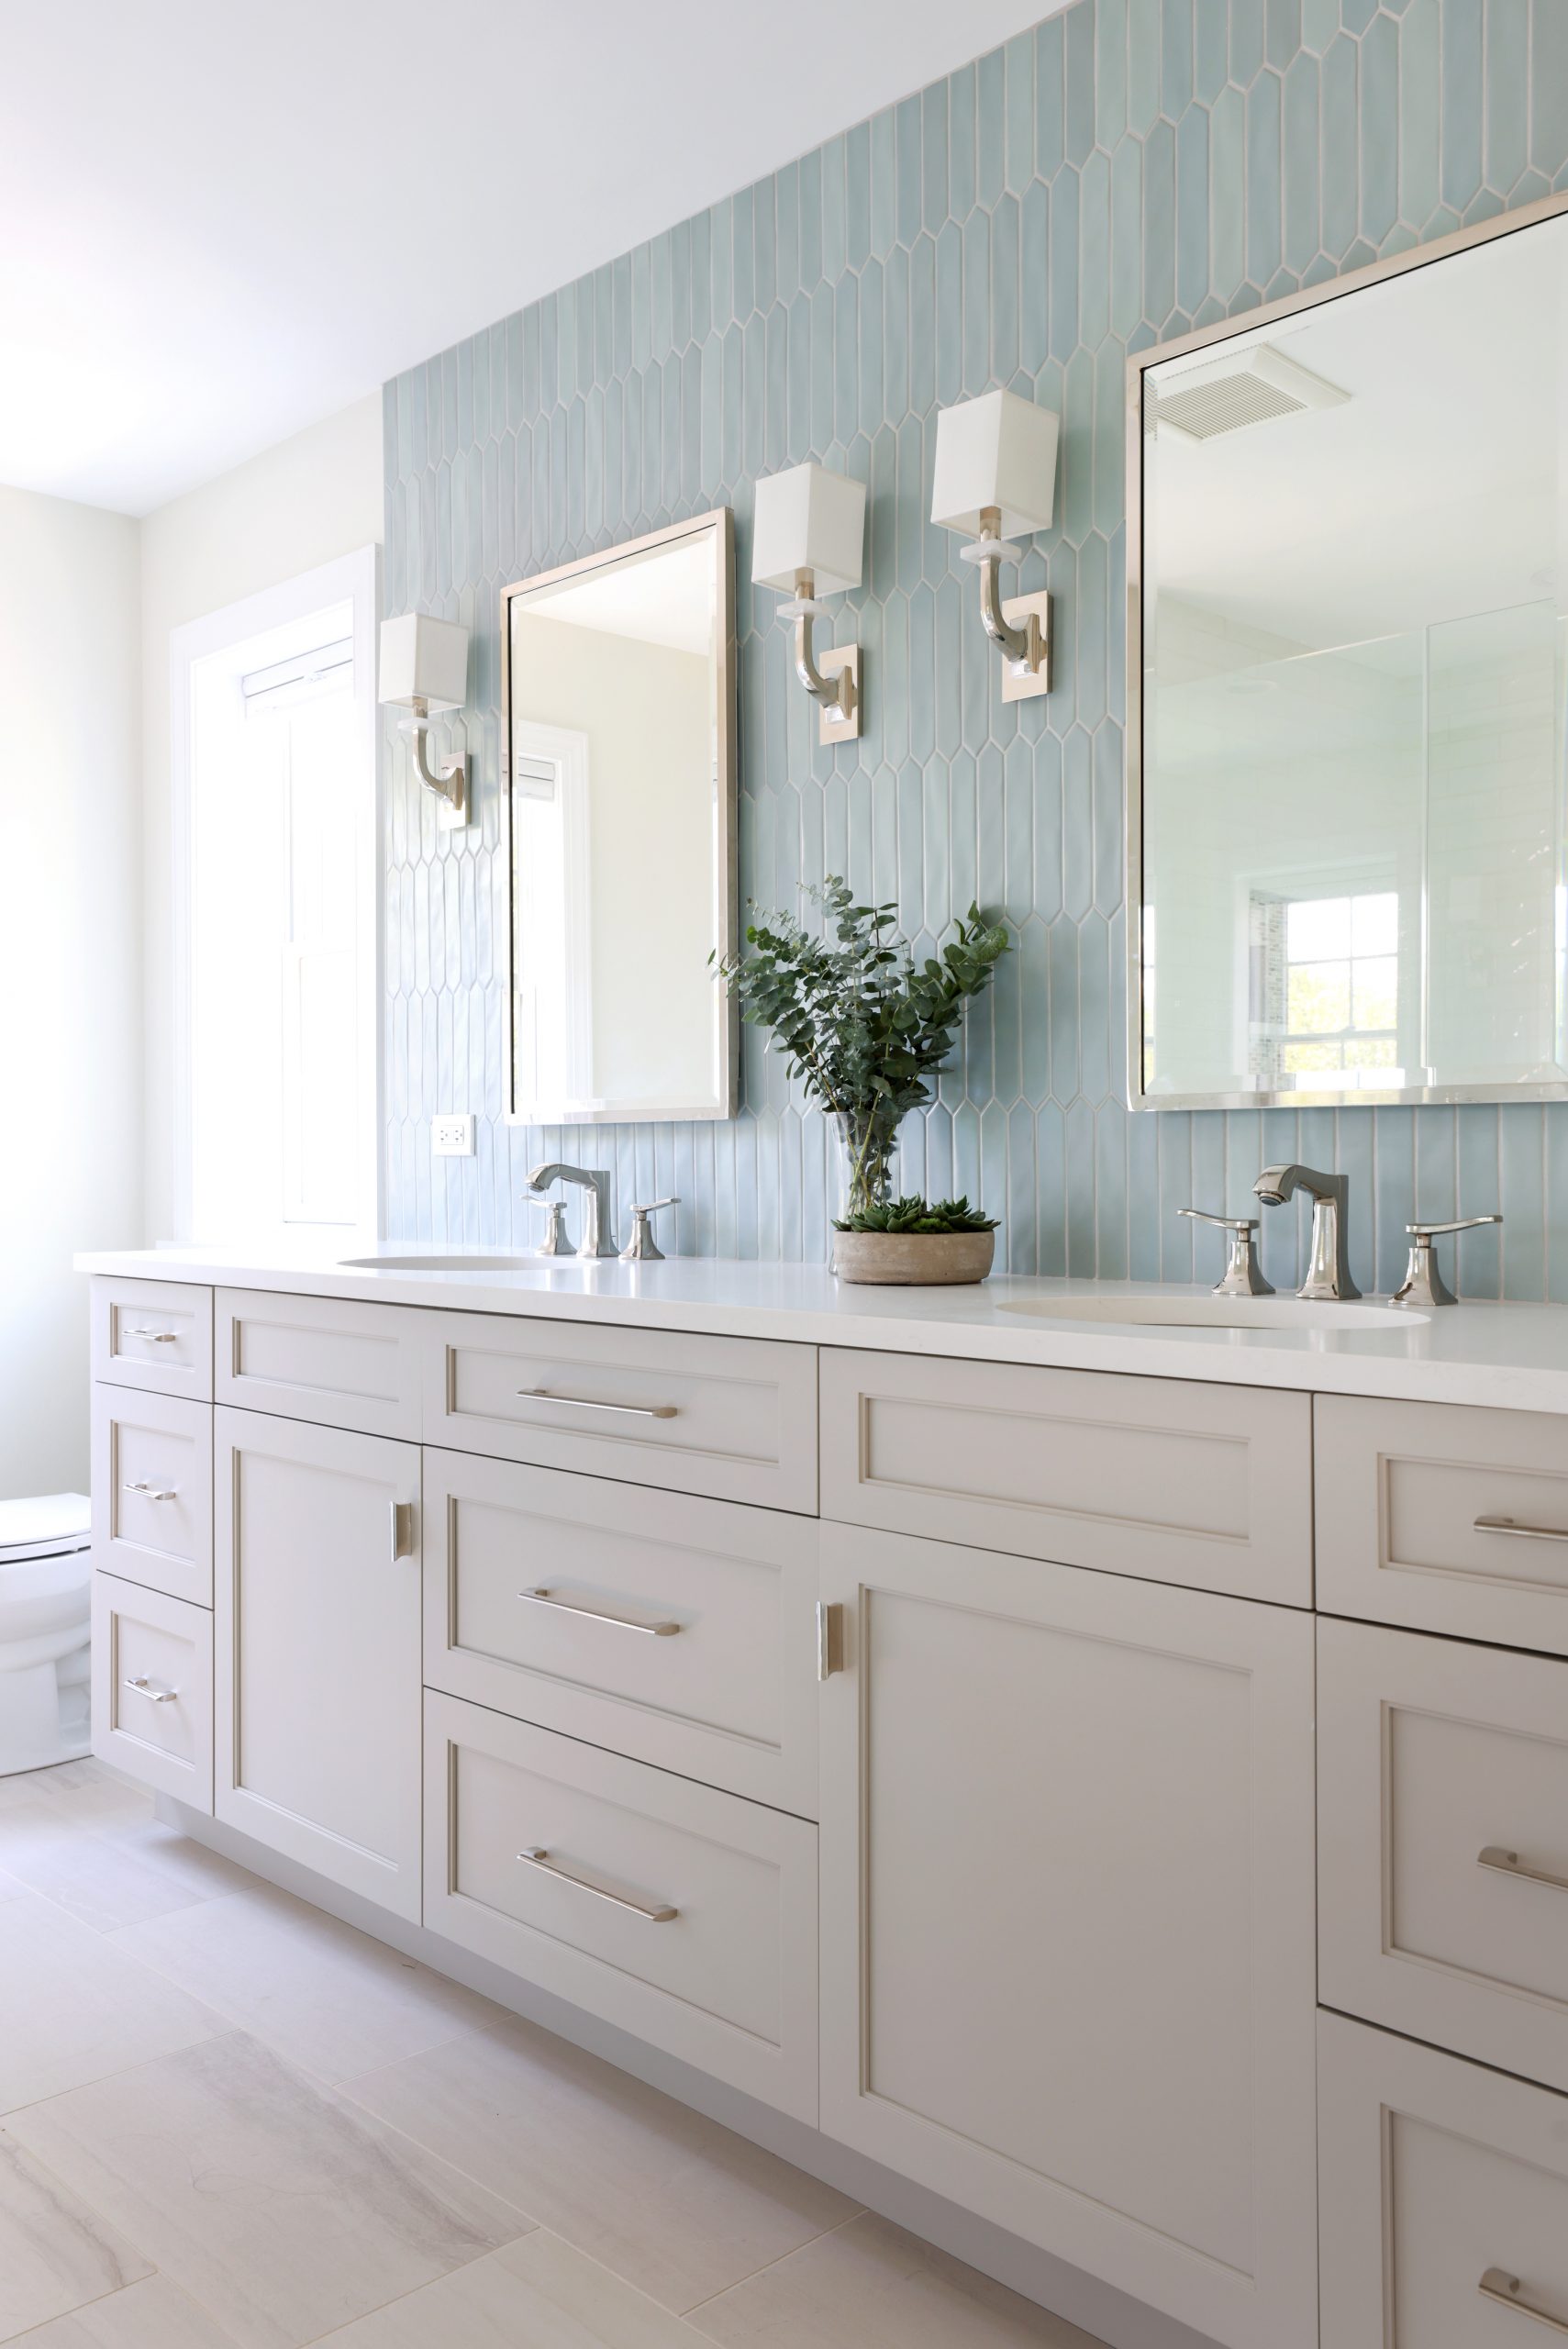 Primary bathroom with warm gray cabinets and blue tile